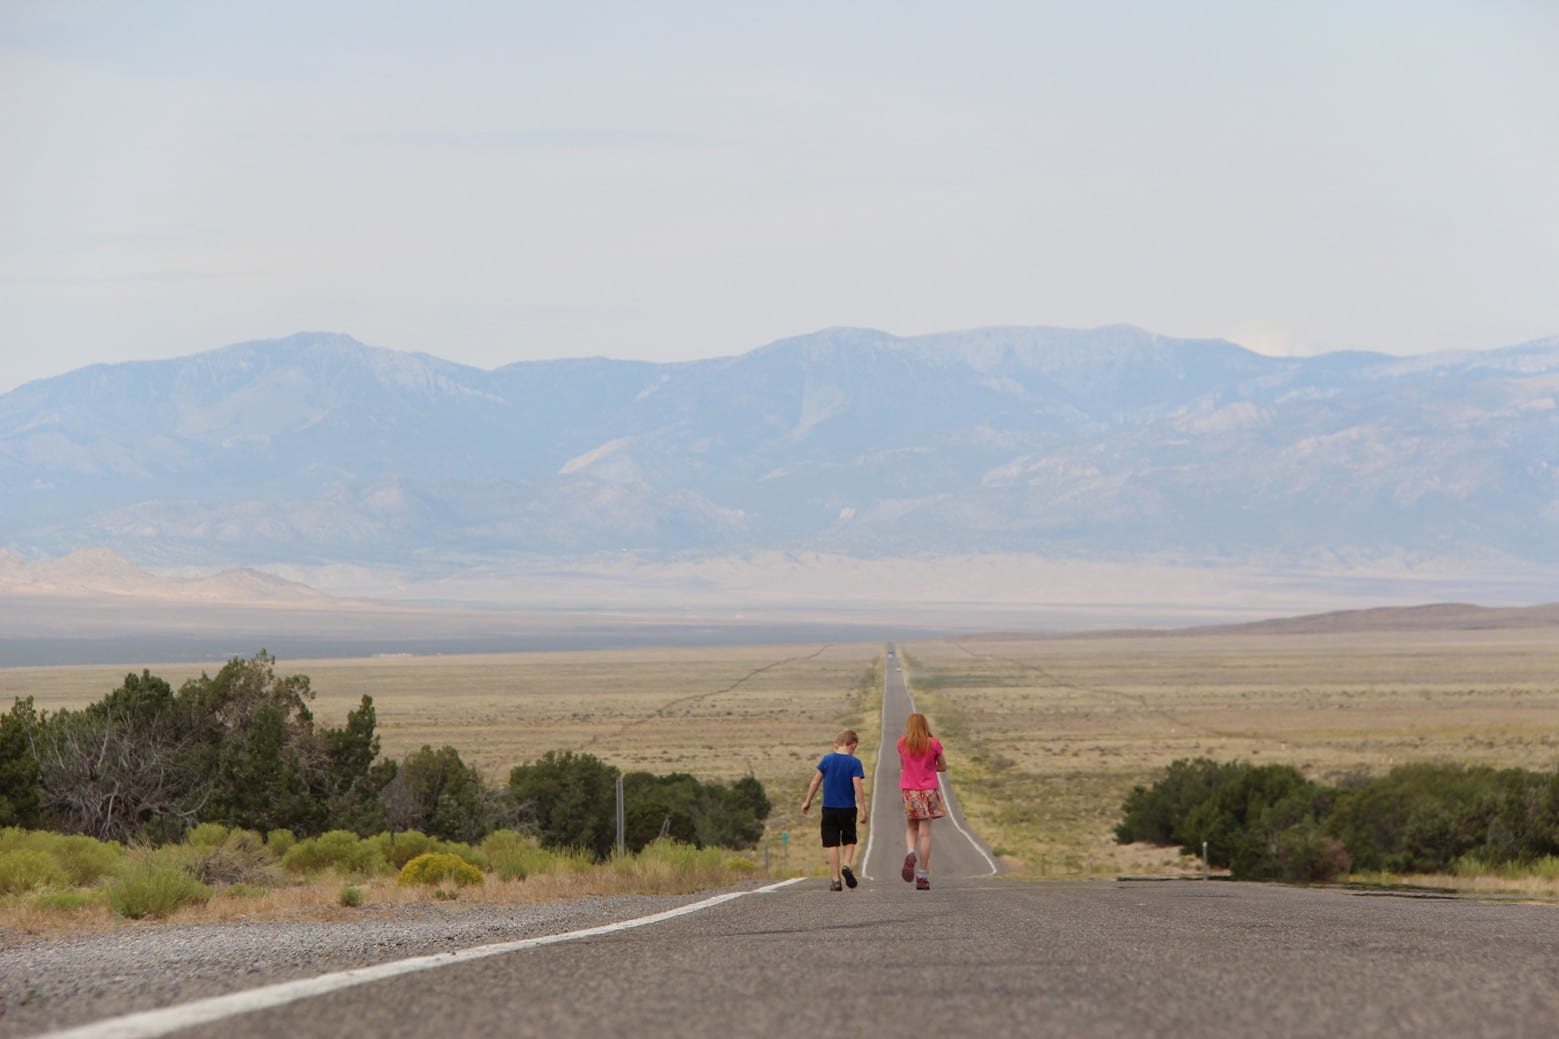 The Loneliest Road in America